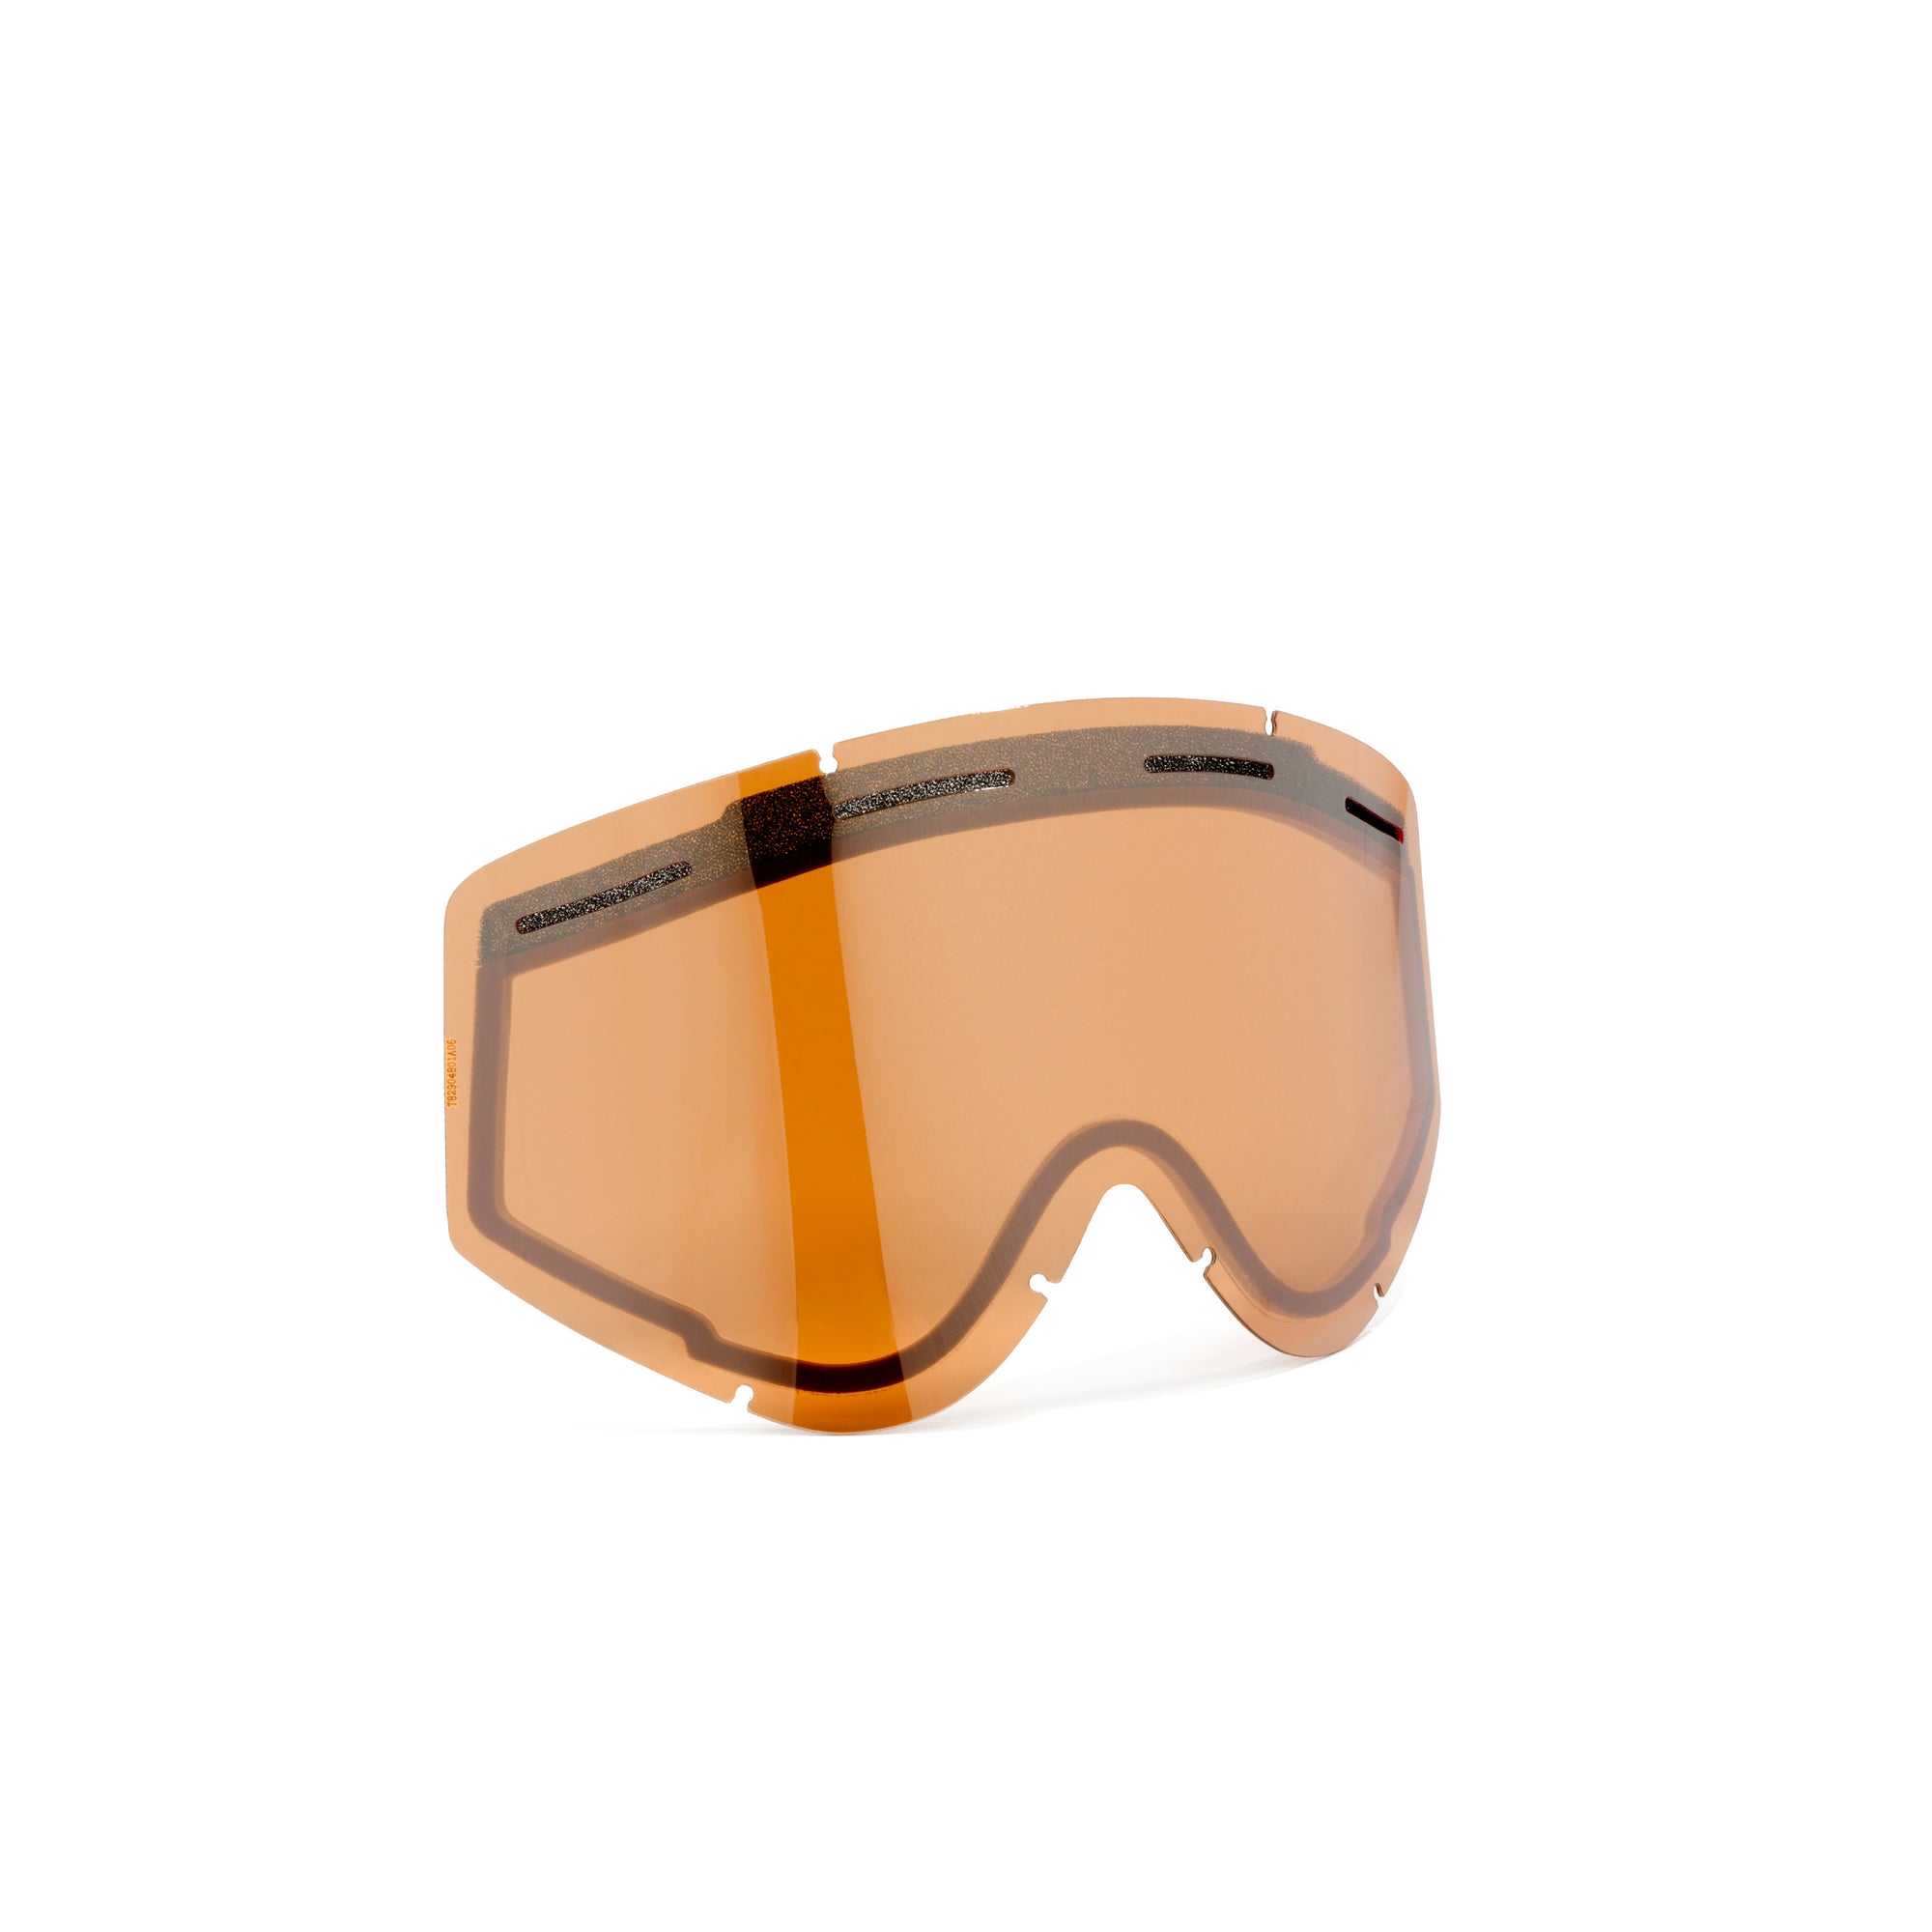 Soaza Double Lens - Goggles Spare Lenses|DLESOAED13